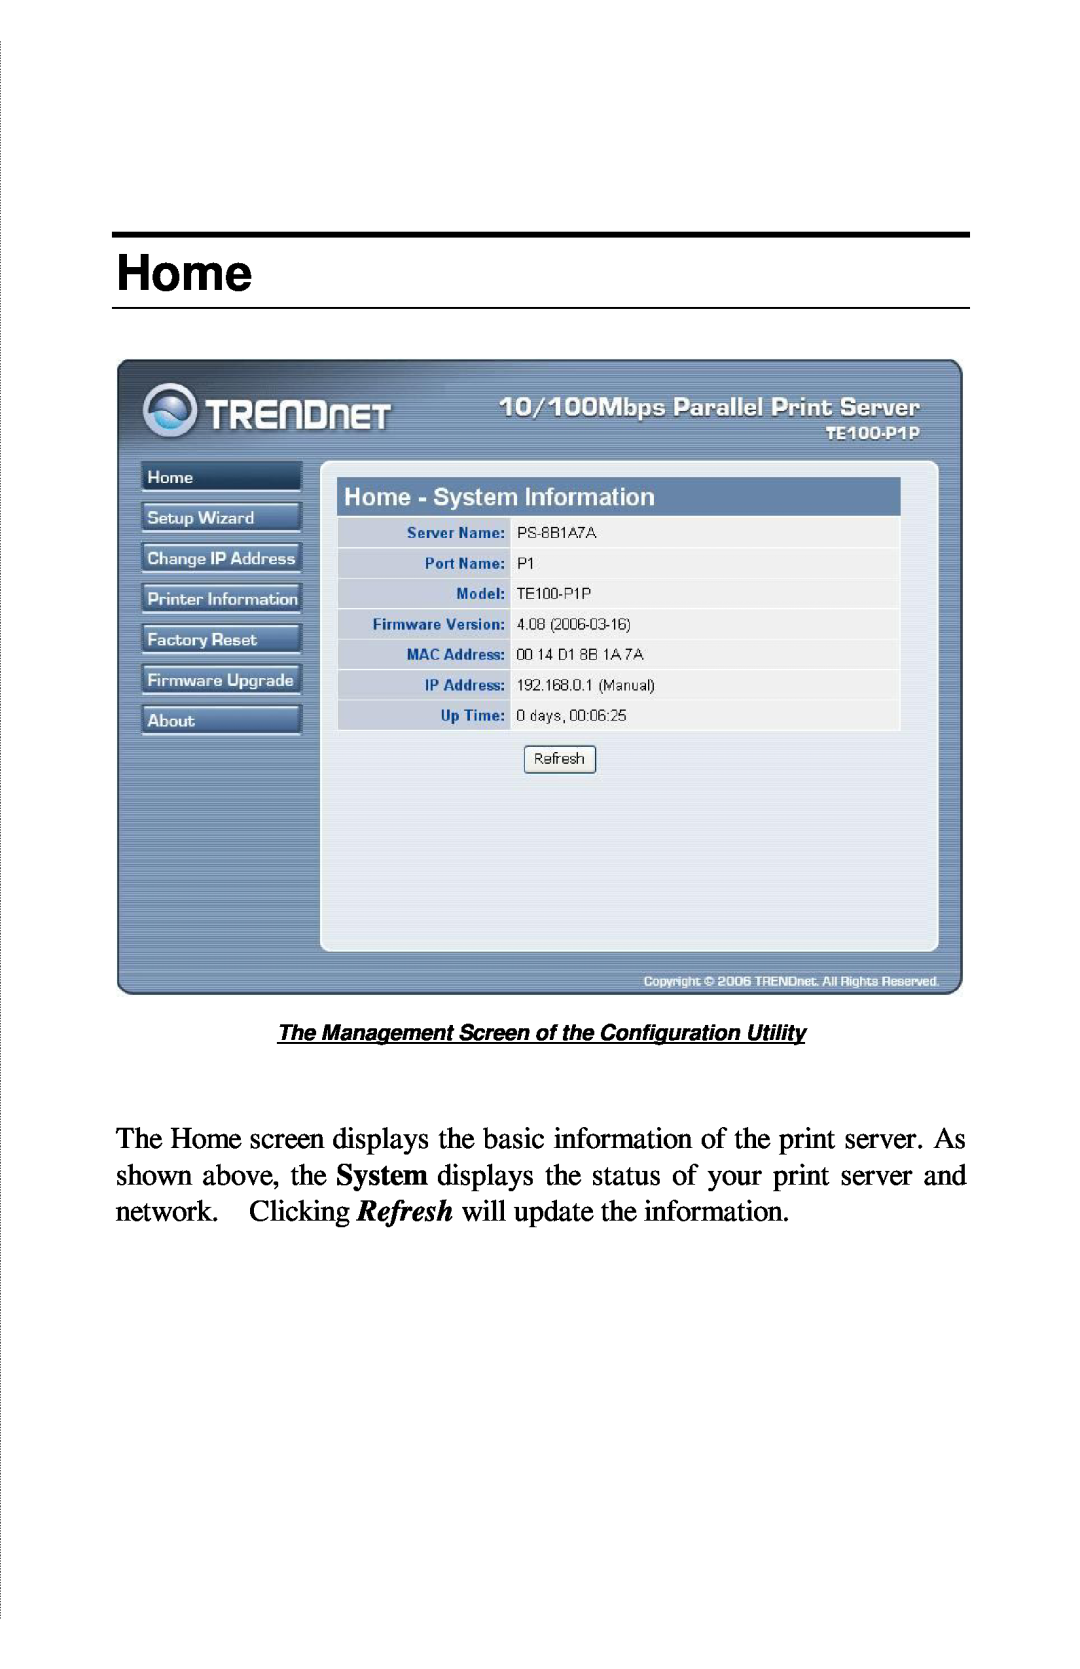 TRENDnet TE100-PIP manual Home, The Management Screen of the Configuration Utility 